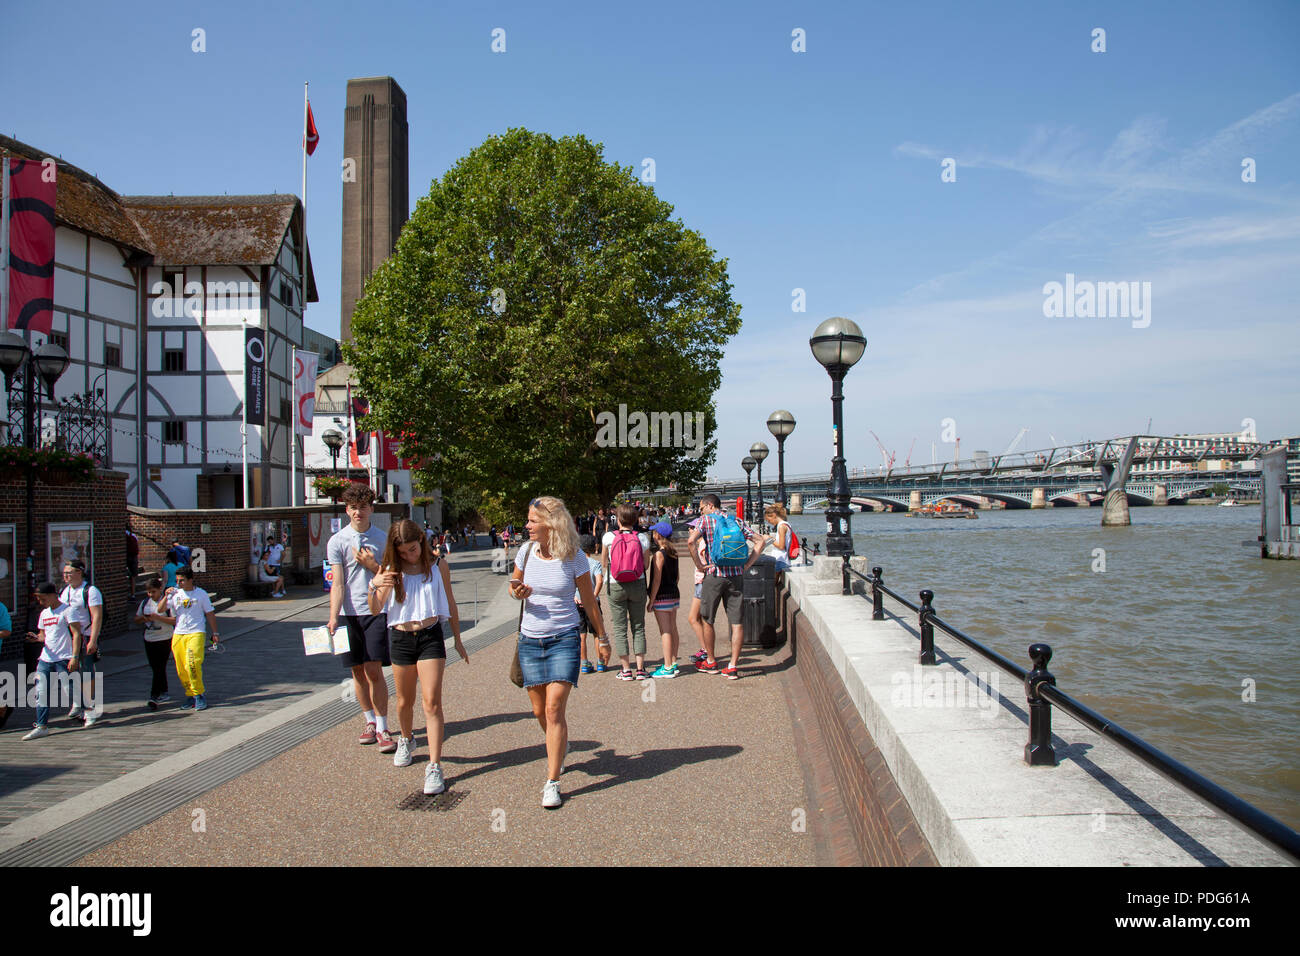 Shakespeare'sGlobe Theatre on London's Southbank with river Thames and tourists in summer Stock Photo